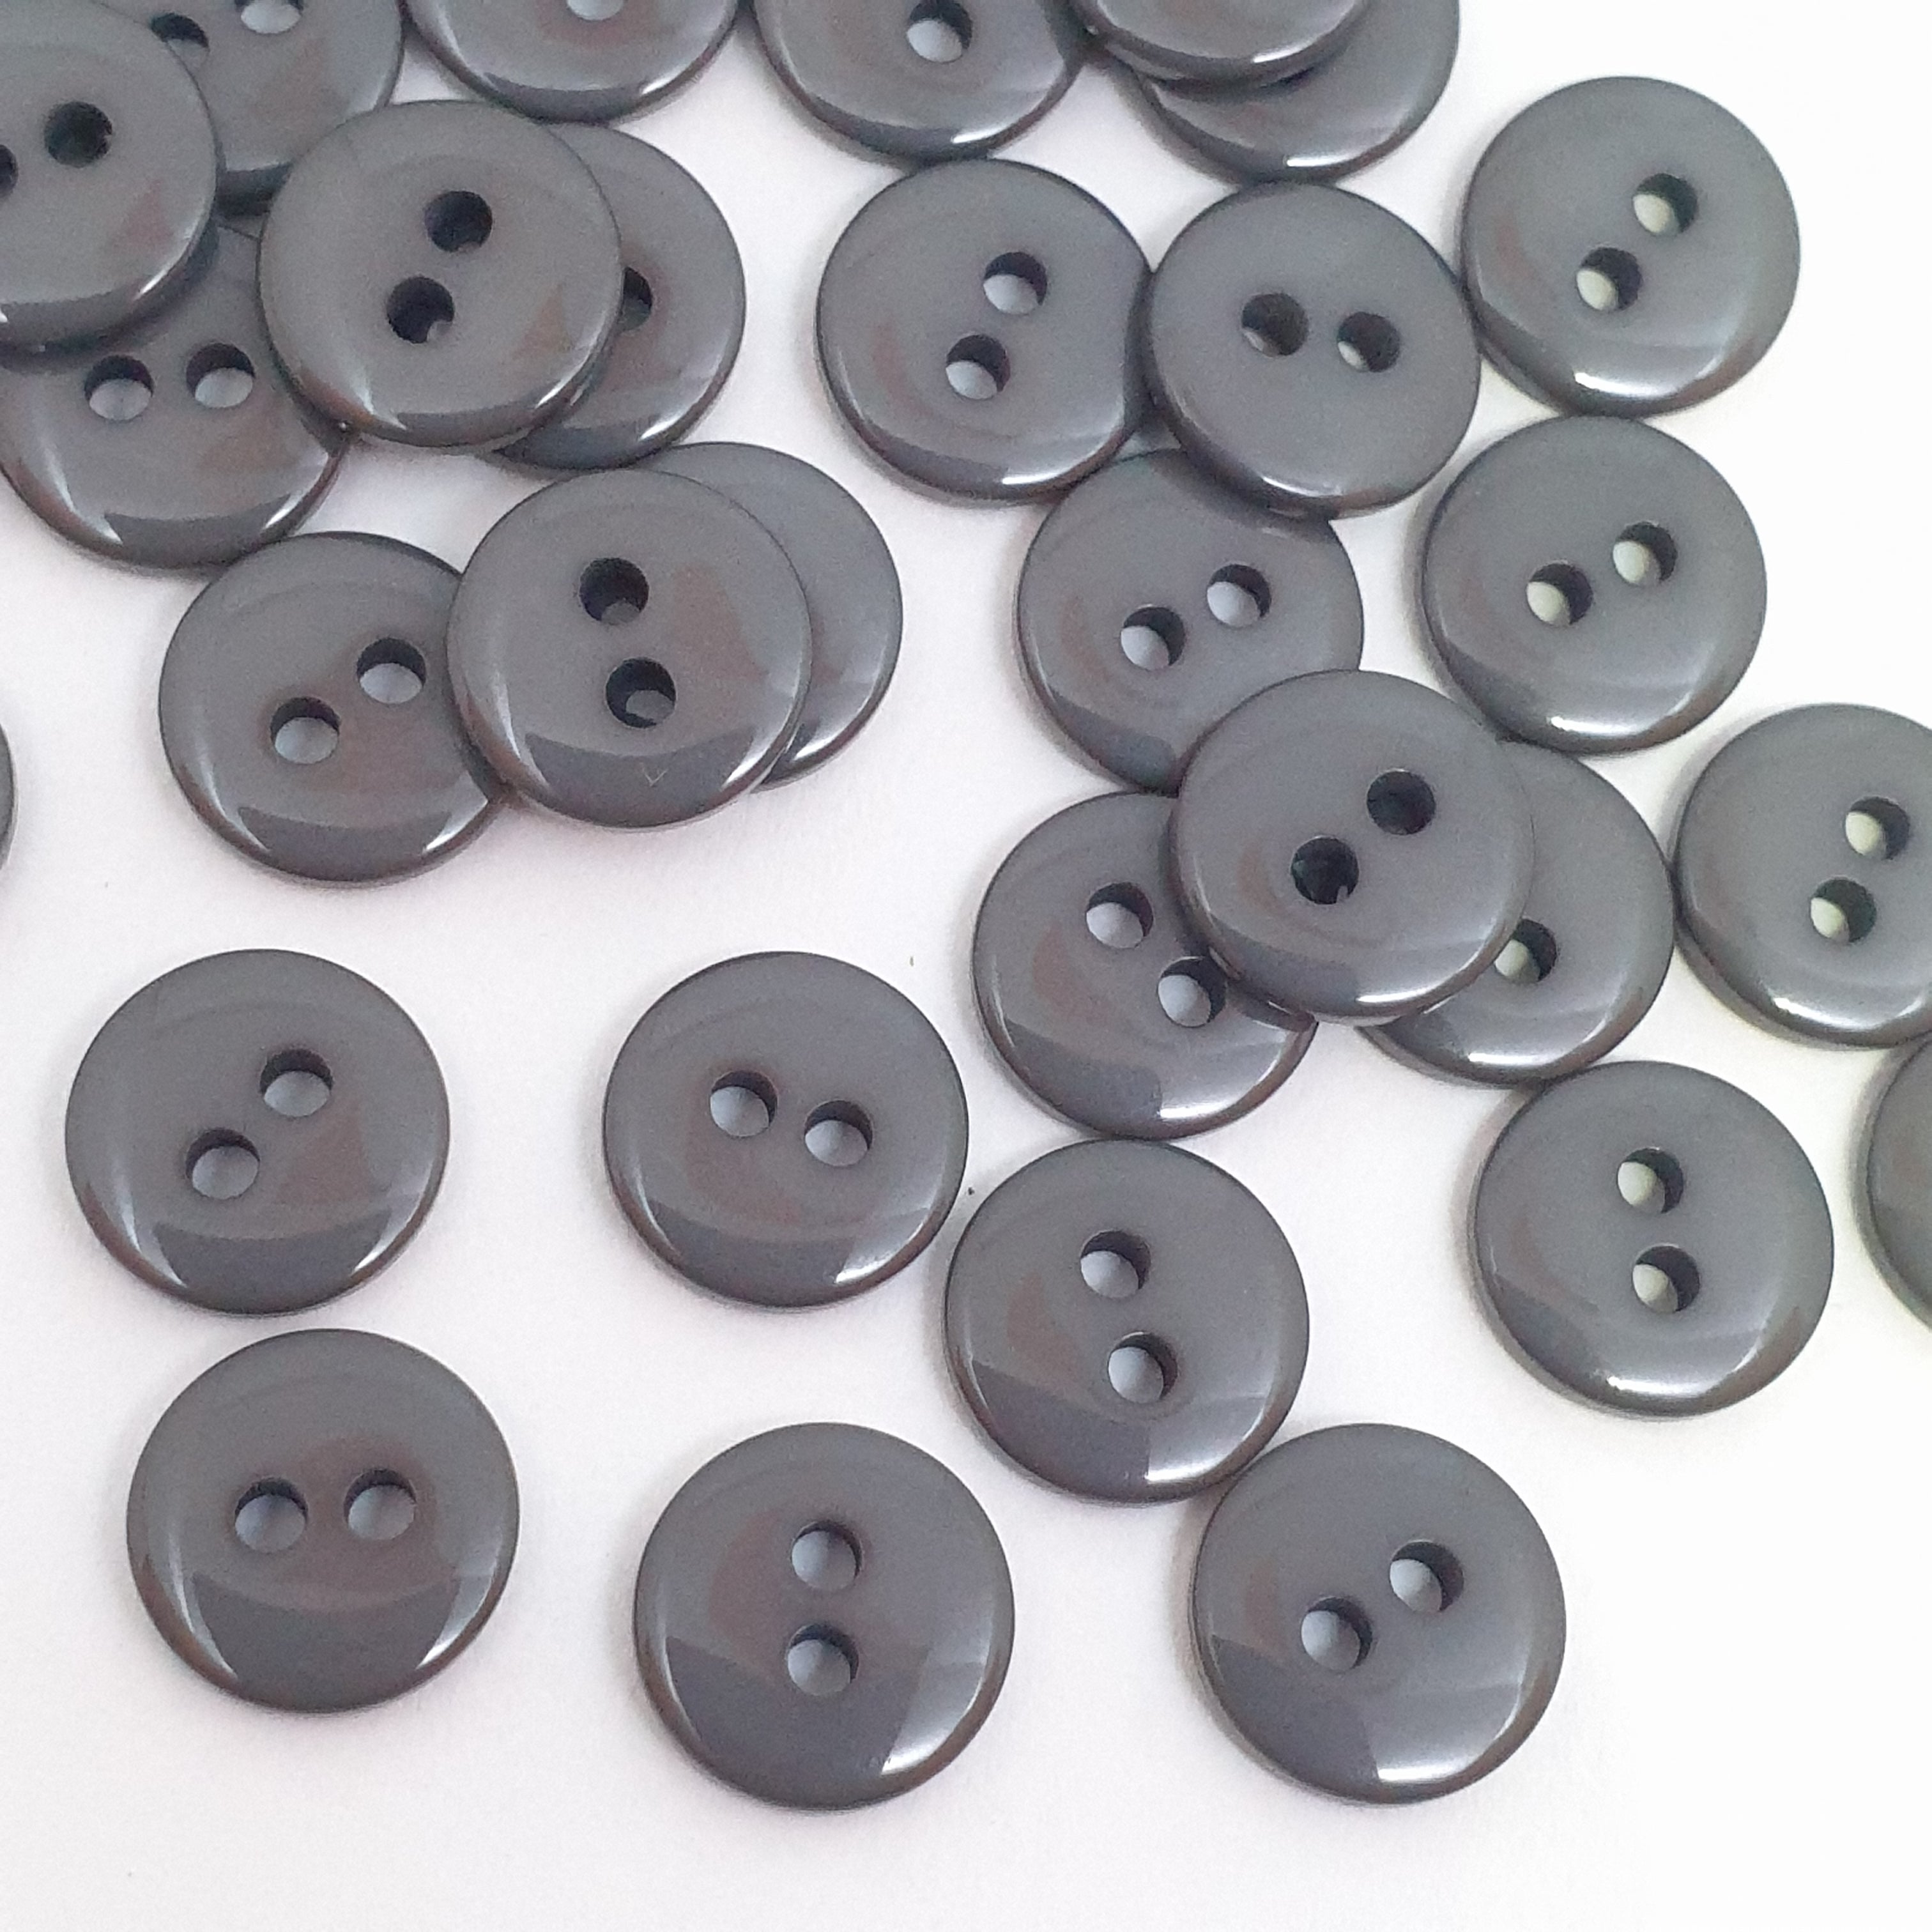 MajorCrafts 120pcs 9mm Grey Small 2 Holes Round Resin Sewing Buttons B24